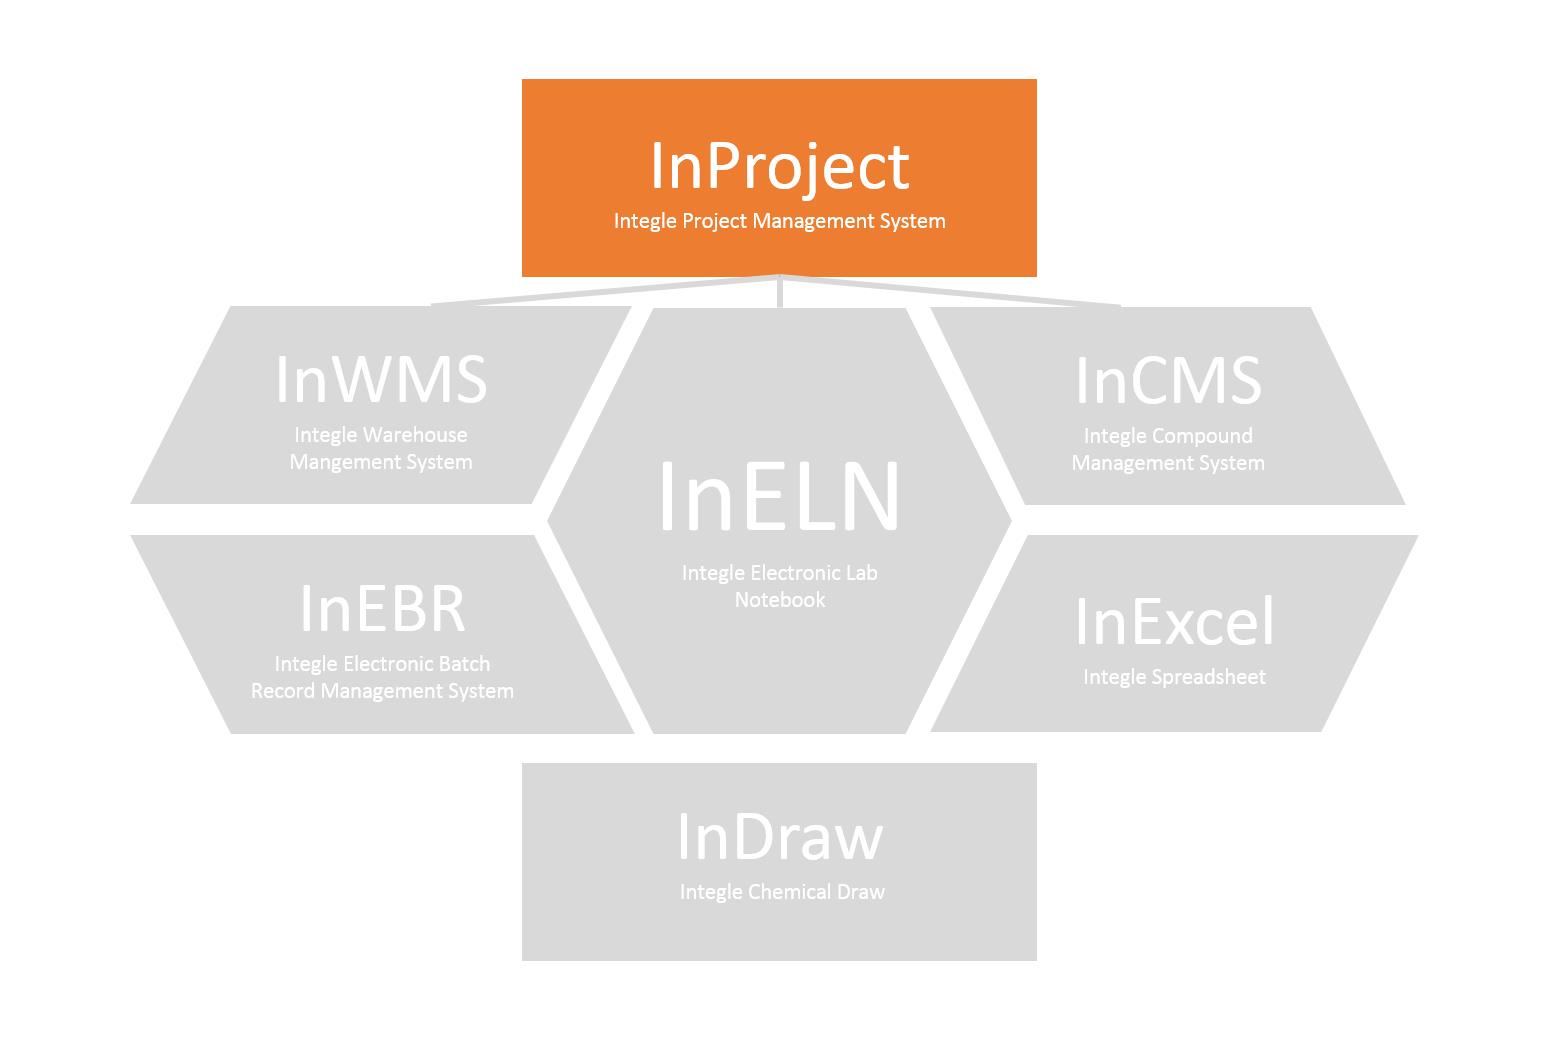  InProject enables the project managers as the center to manage all projects